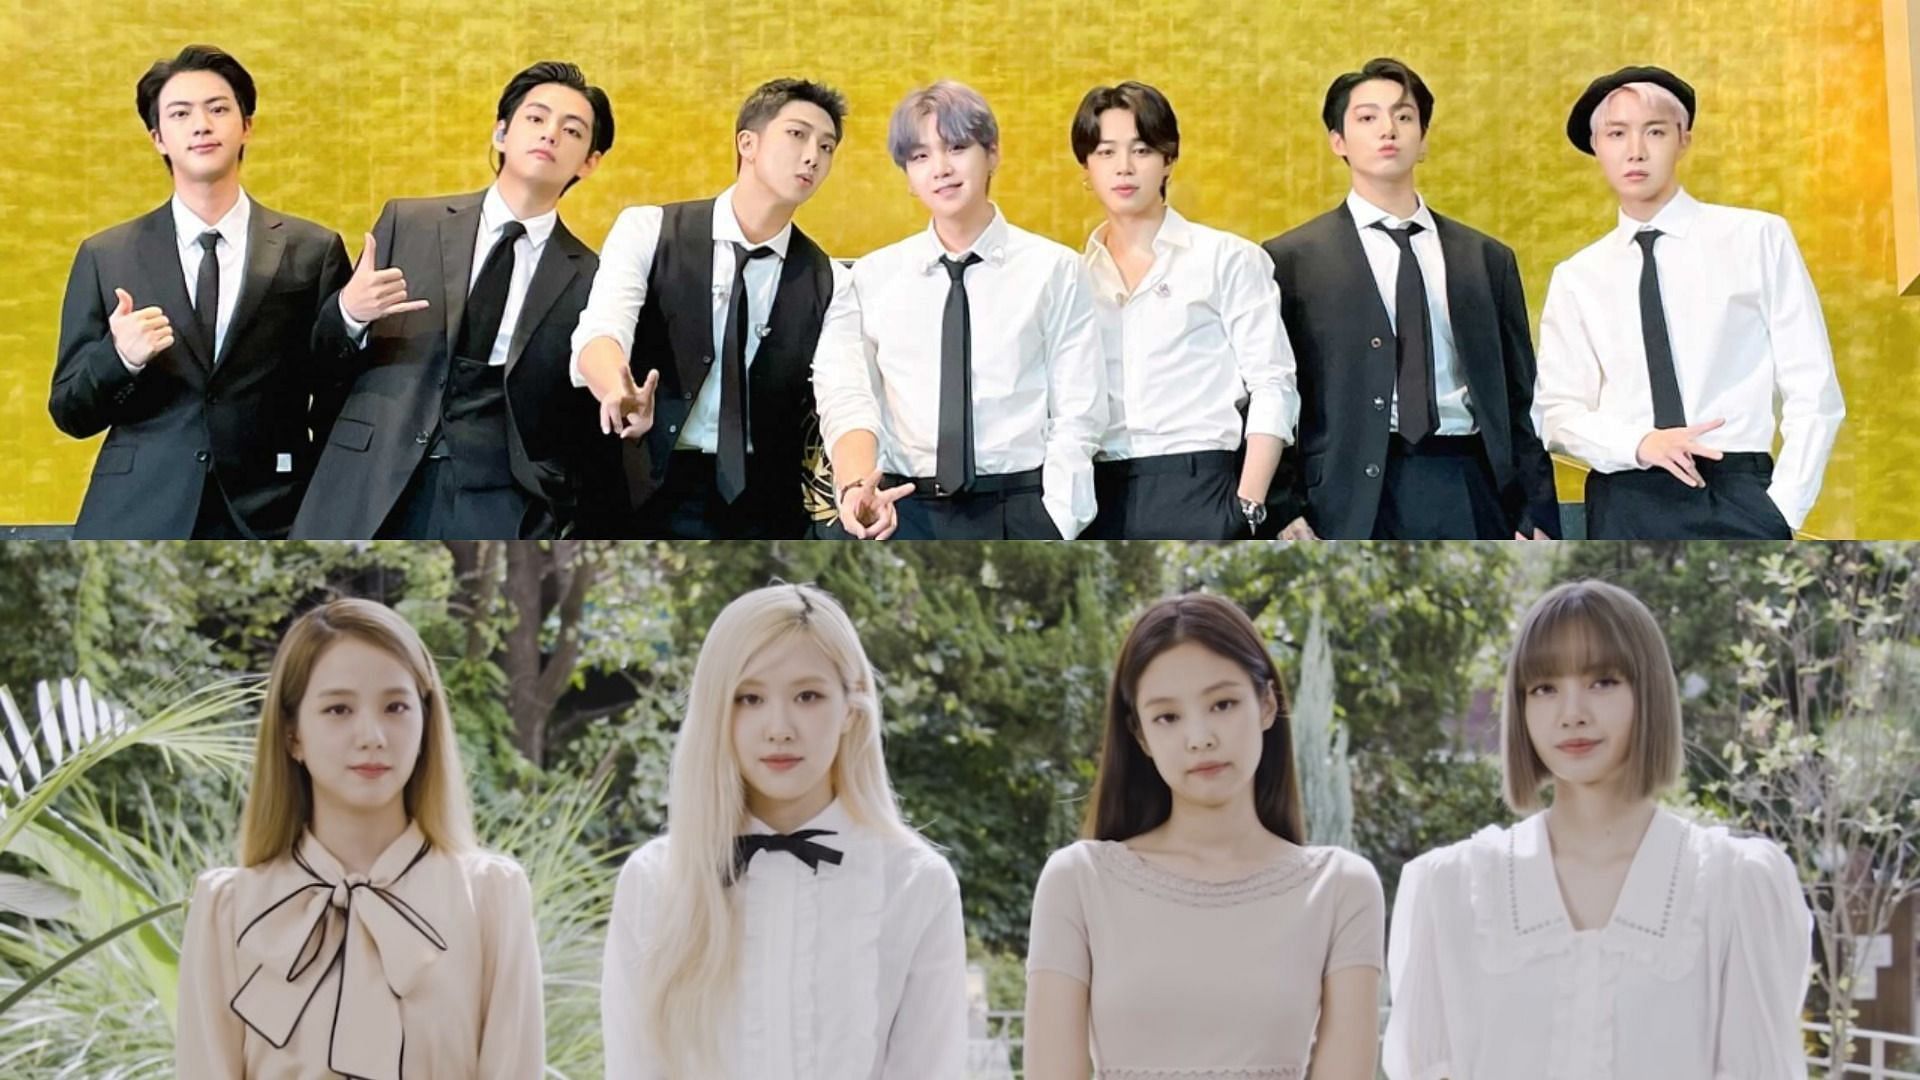 BTS and BLACKPINK are ambassadors for multiple UN campaigns. (Images via @bts_bighit/Twitter and BLACKPINK/Youtube)